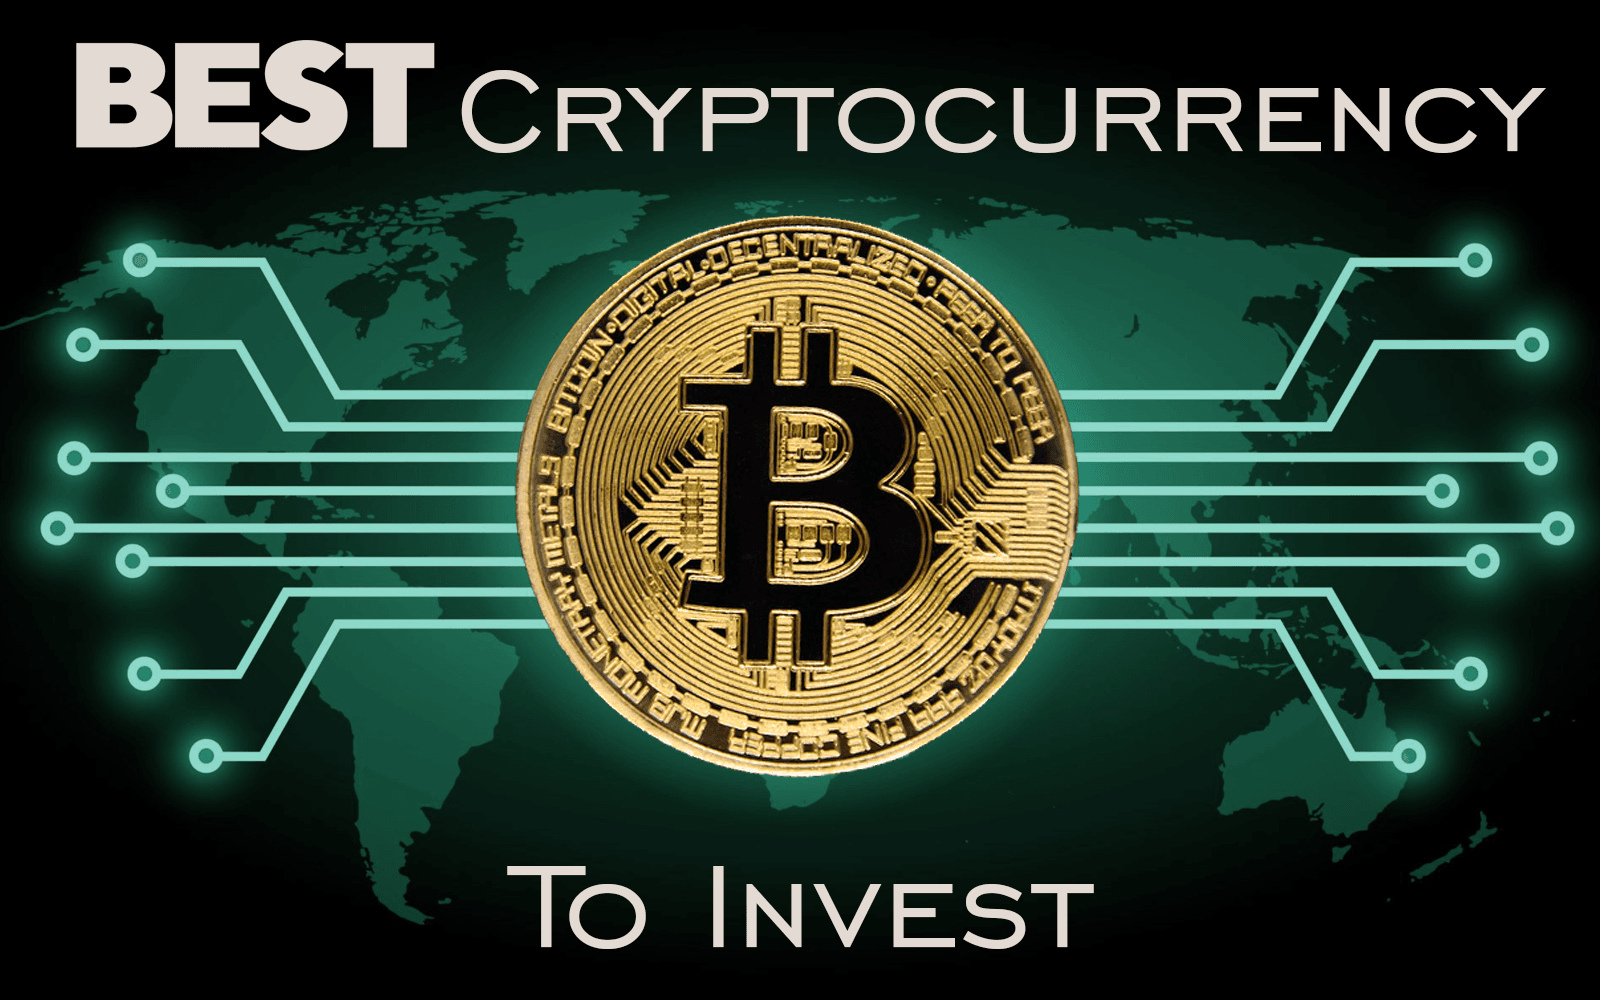 Why Is Bitcoin The Best Cryptocurrency To Invest In?